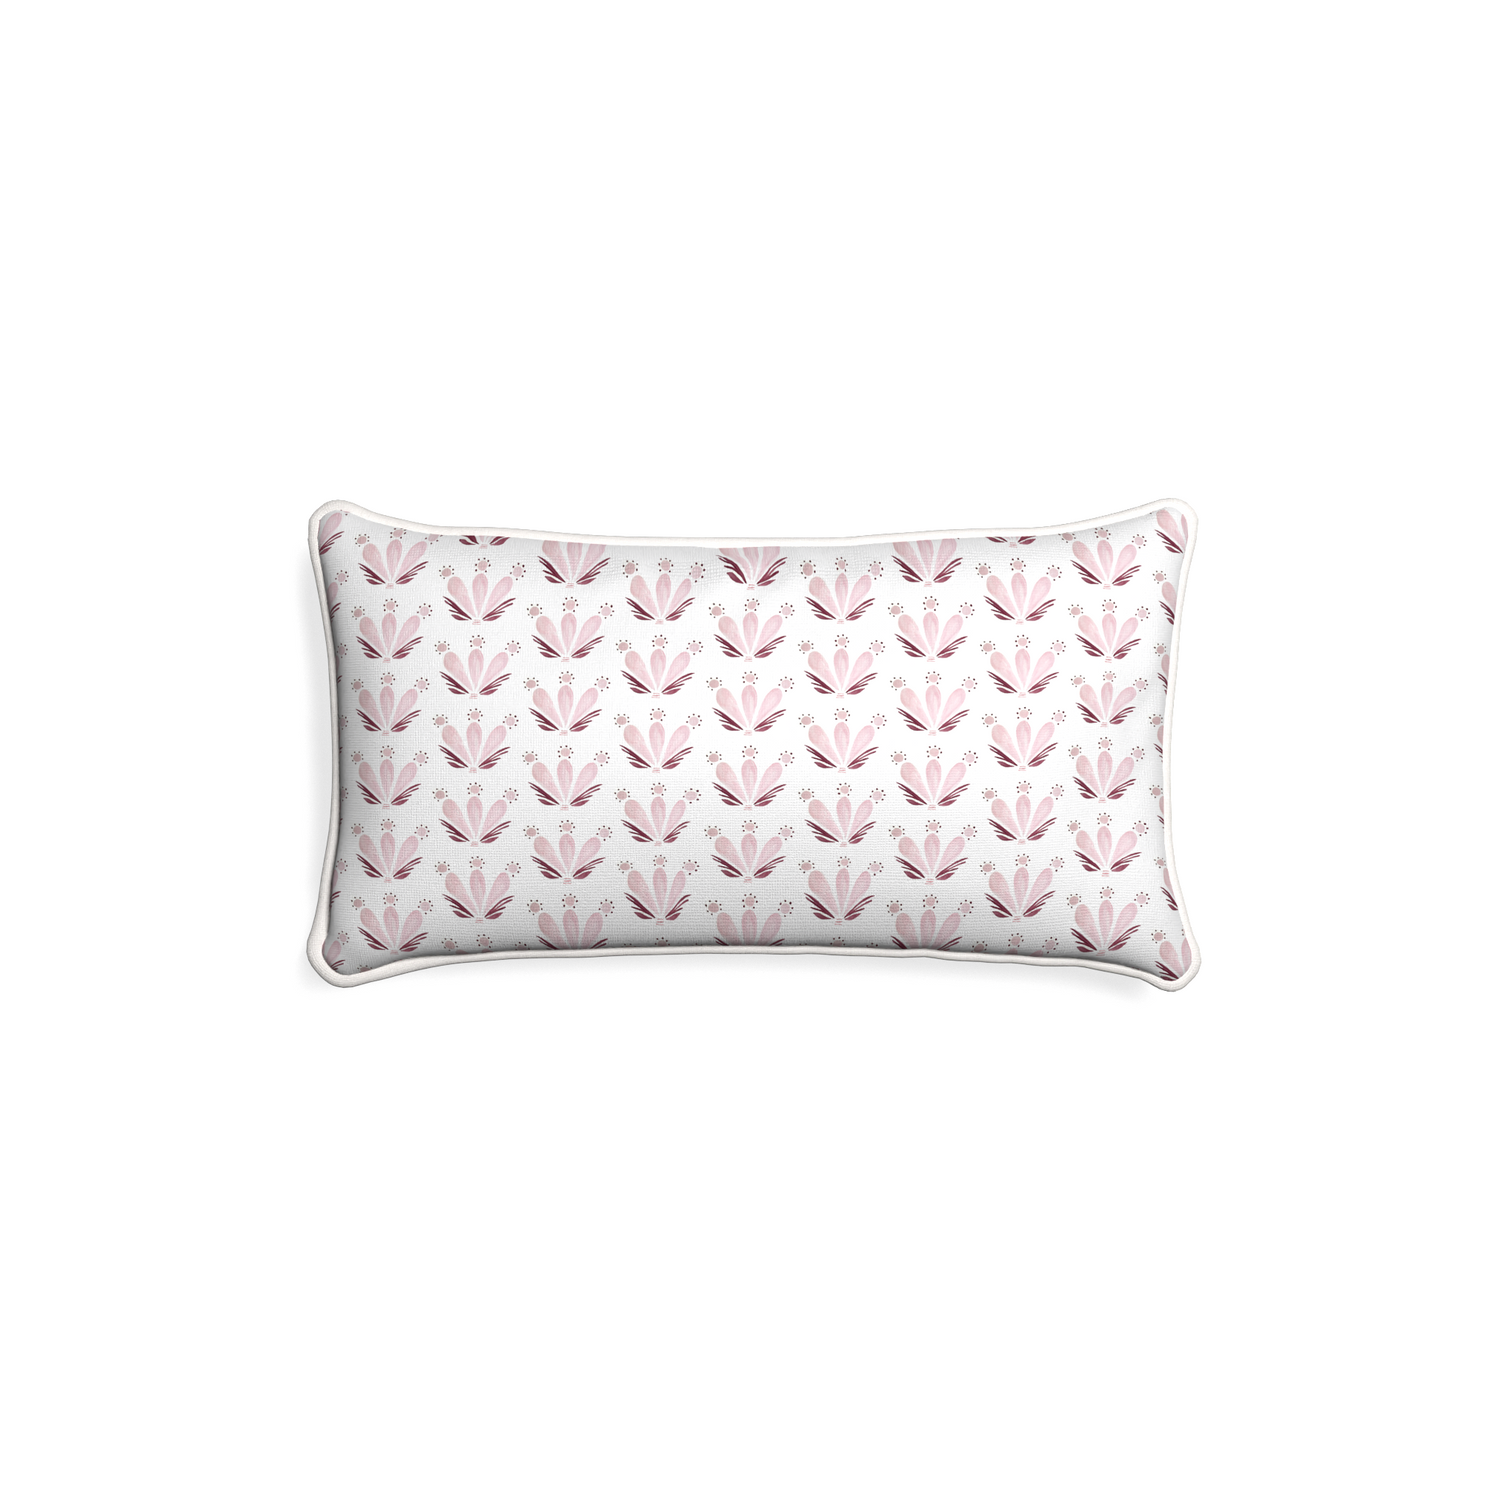 Petite-lumbar serena pink custom pink & burgundy drop repeat floralpillow with snow piping on white background